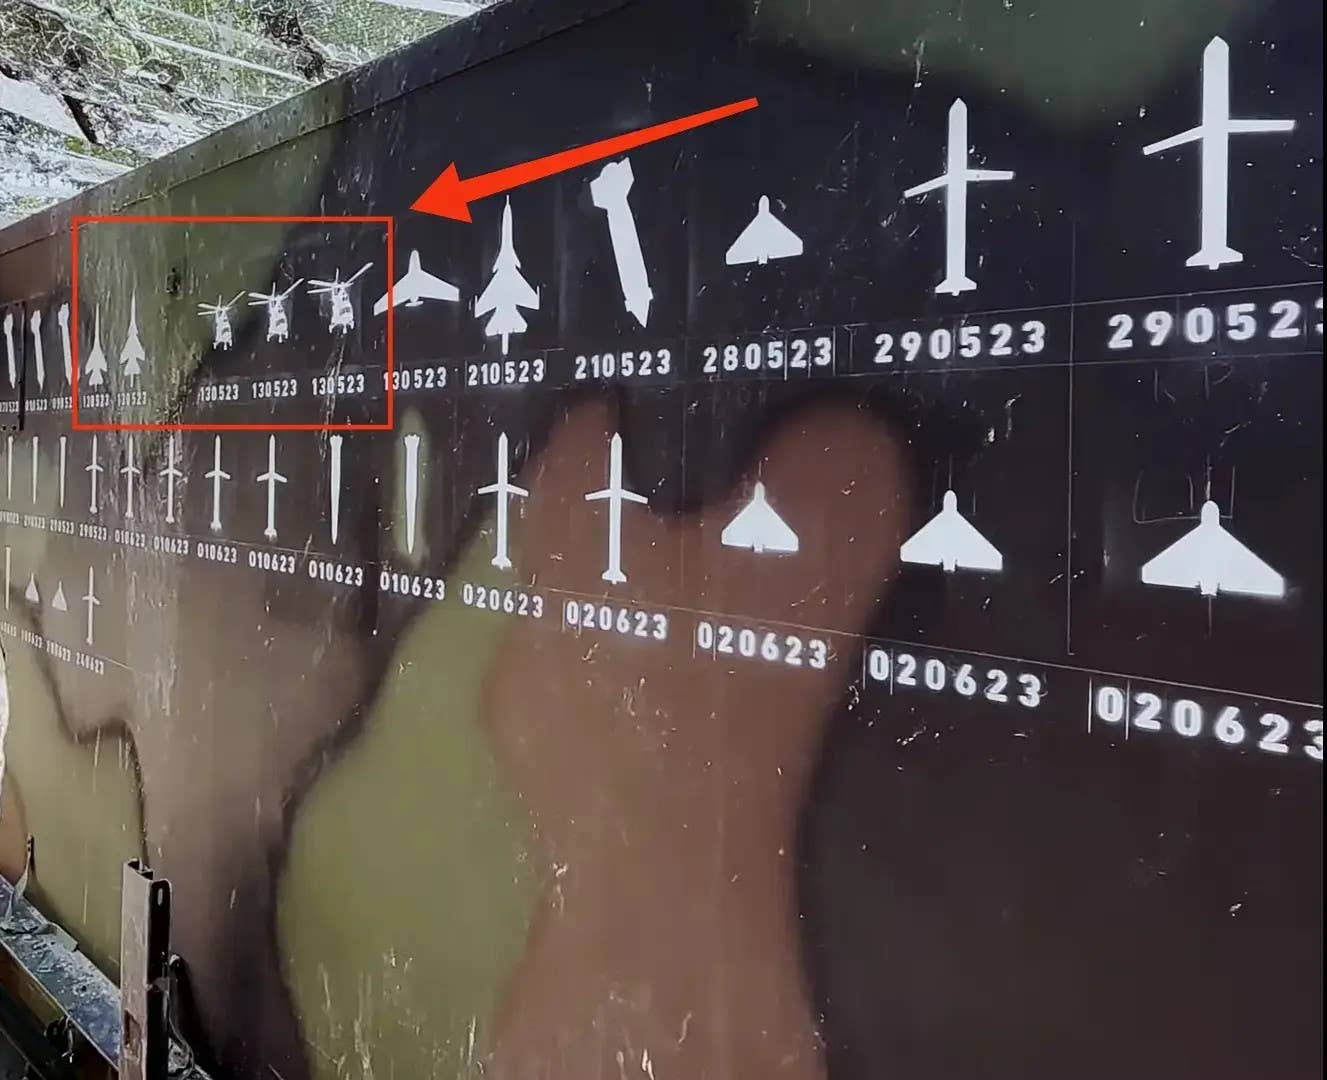 A screen capture from a previously released Ukrainian Air Force video showing kill markings on a portion of a Ukrainian Patriot air defense system. Silhouettes of three Russian helicopters and two Russian combat jets all show the date May 13, 2023 (130523). Ukrainian authorities have subsequently said all of those aircraft and helicopters were shot down inside Russian airspace. <em>Ukrainian Armed Forces</em>